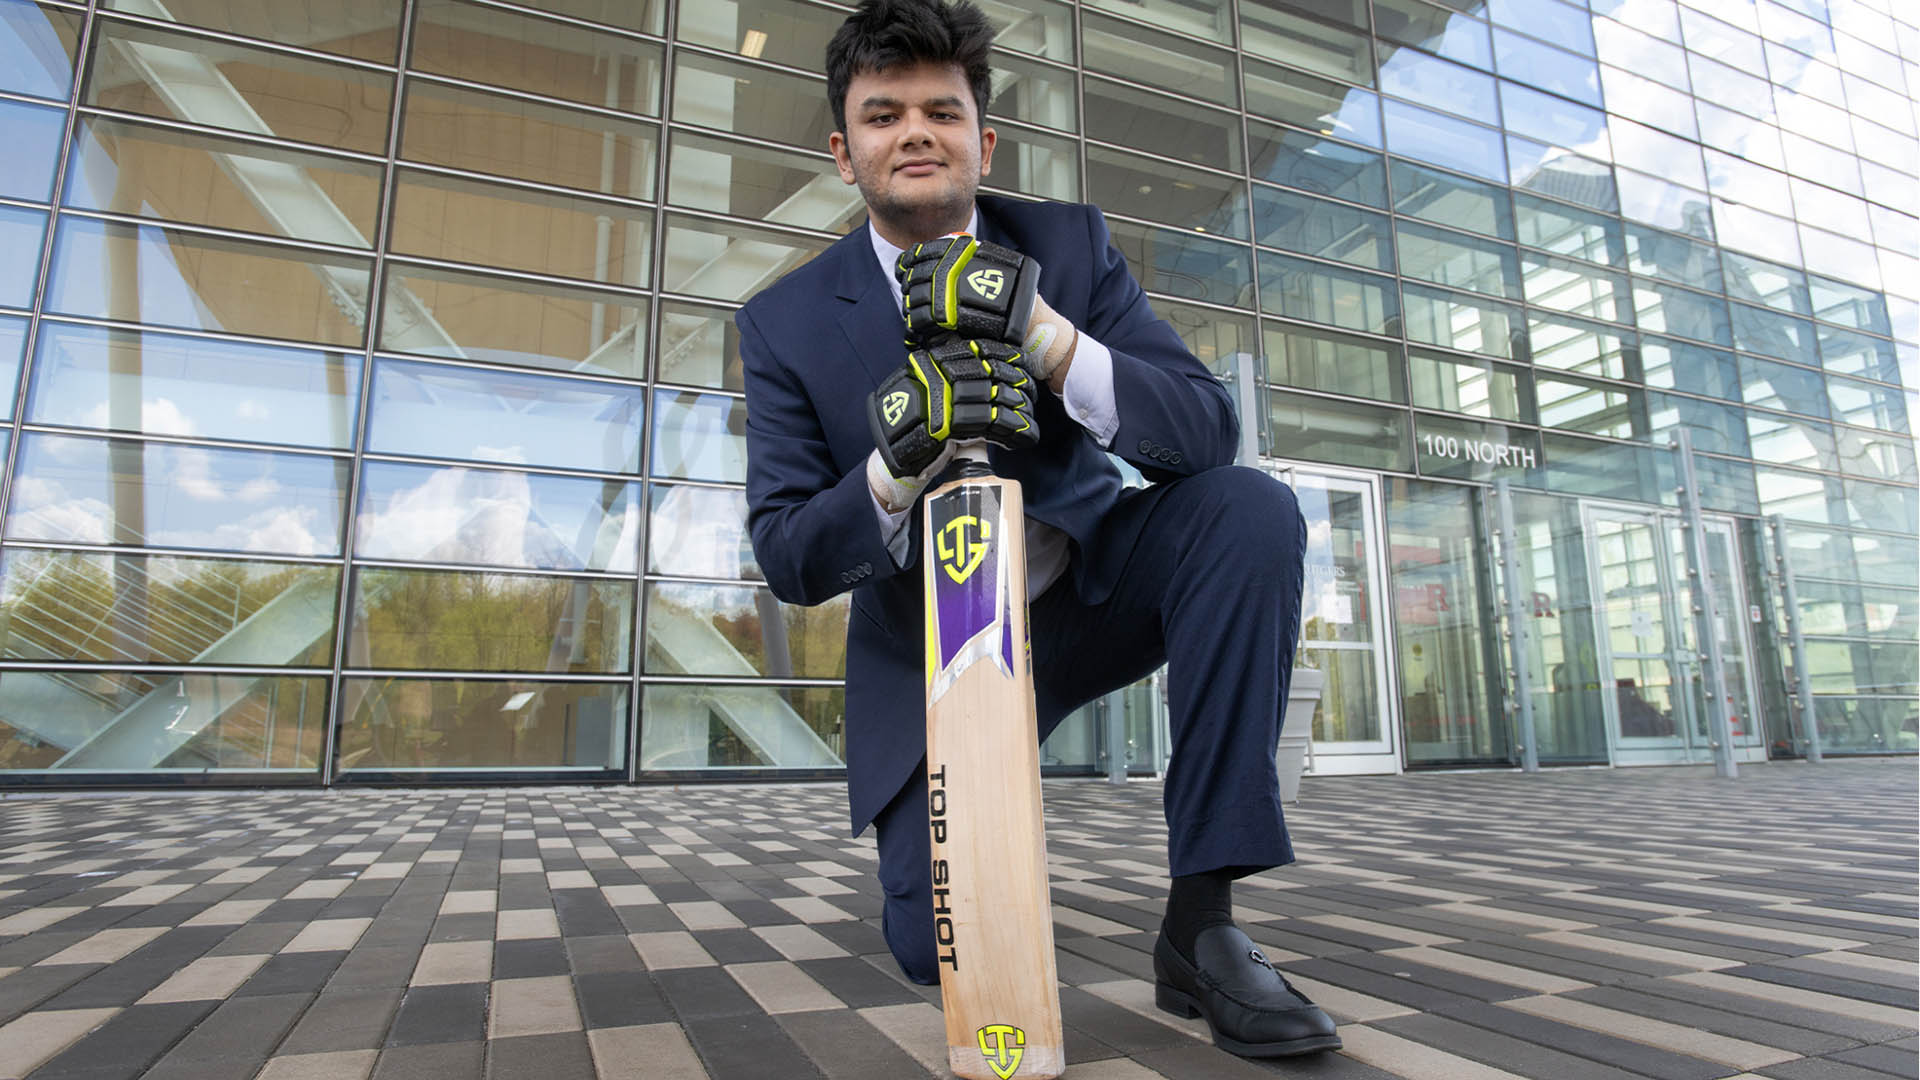 Senior Deep Joshi (EJB ’24) represented the nation on the United States National Cricket Team and has also been recognized for his efforts creating opportunities for dialogue as founder of TEDx Hightstown.